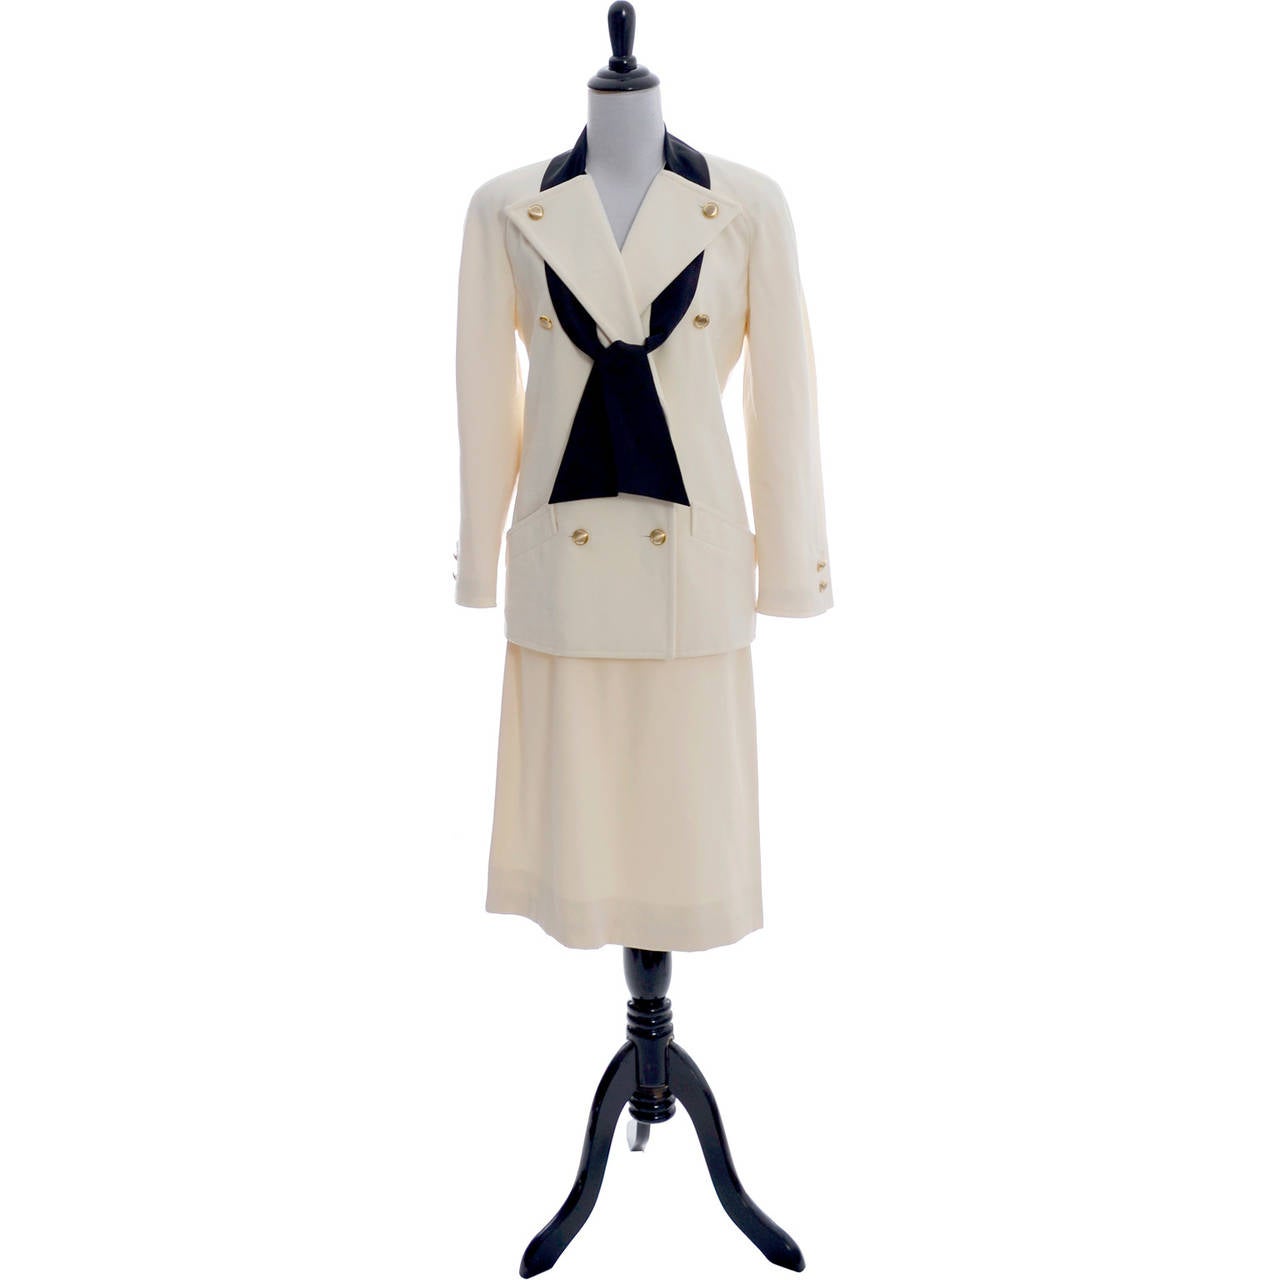 This is such a nice Valentino Boutique Vintage 2 piece suit! This suit is in a finely ribbed cream with gold tone buttons and a pretty black silk scarf that can be tied in a number of different ways. The blazer has pockets and shoulder pads and the